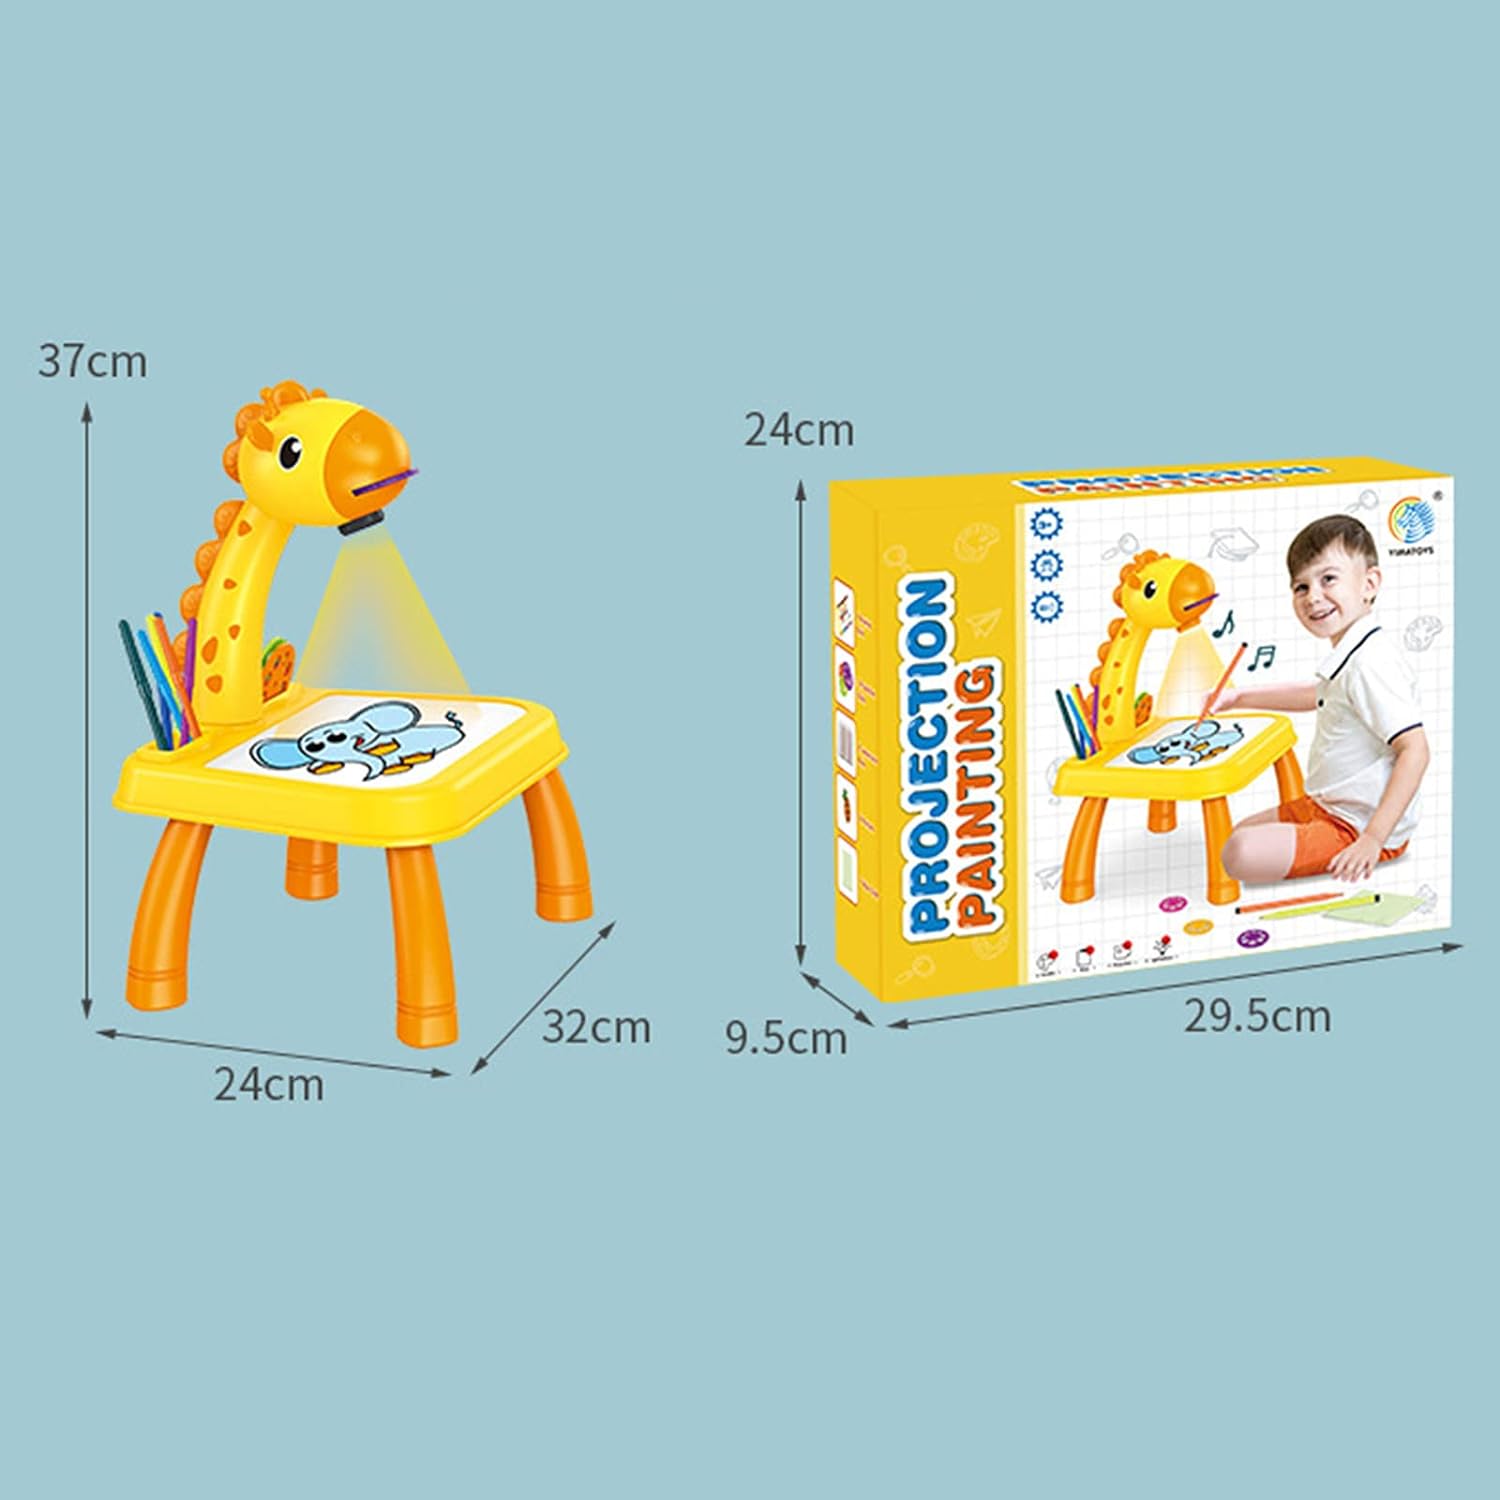 Children's drawing projector table drawing board toy projector desk for children's early education